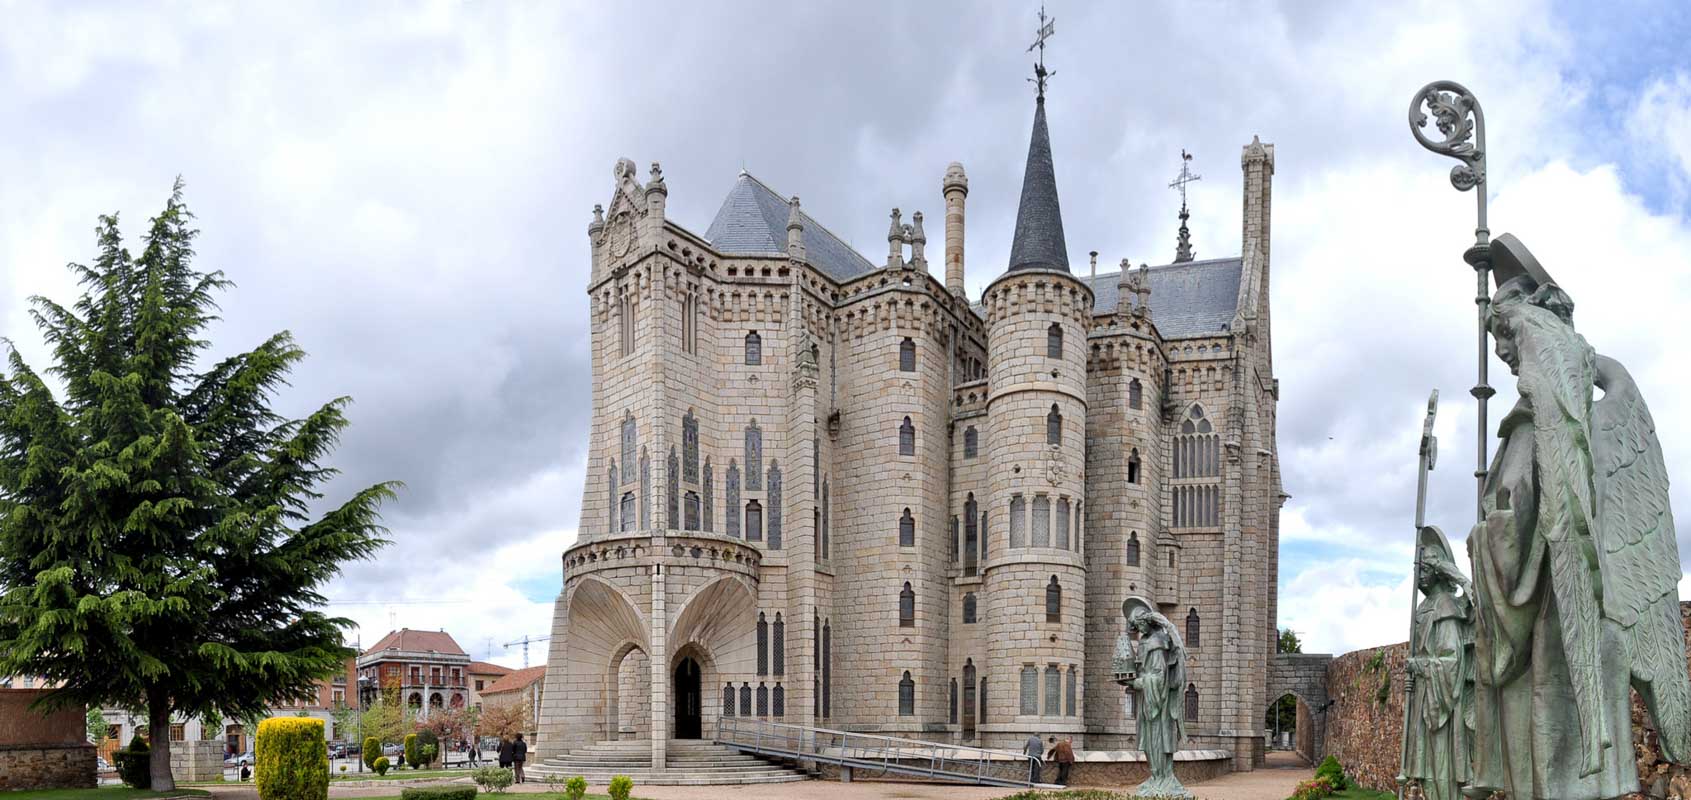 the astorga palace among the most famous castles in spain